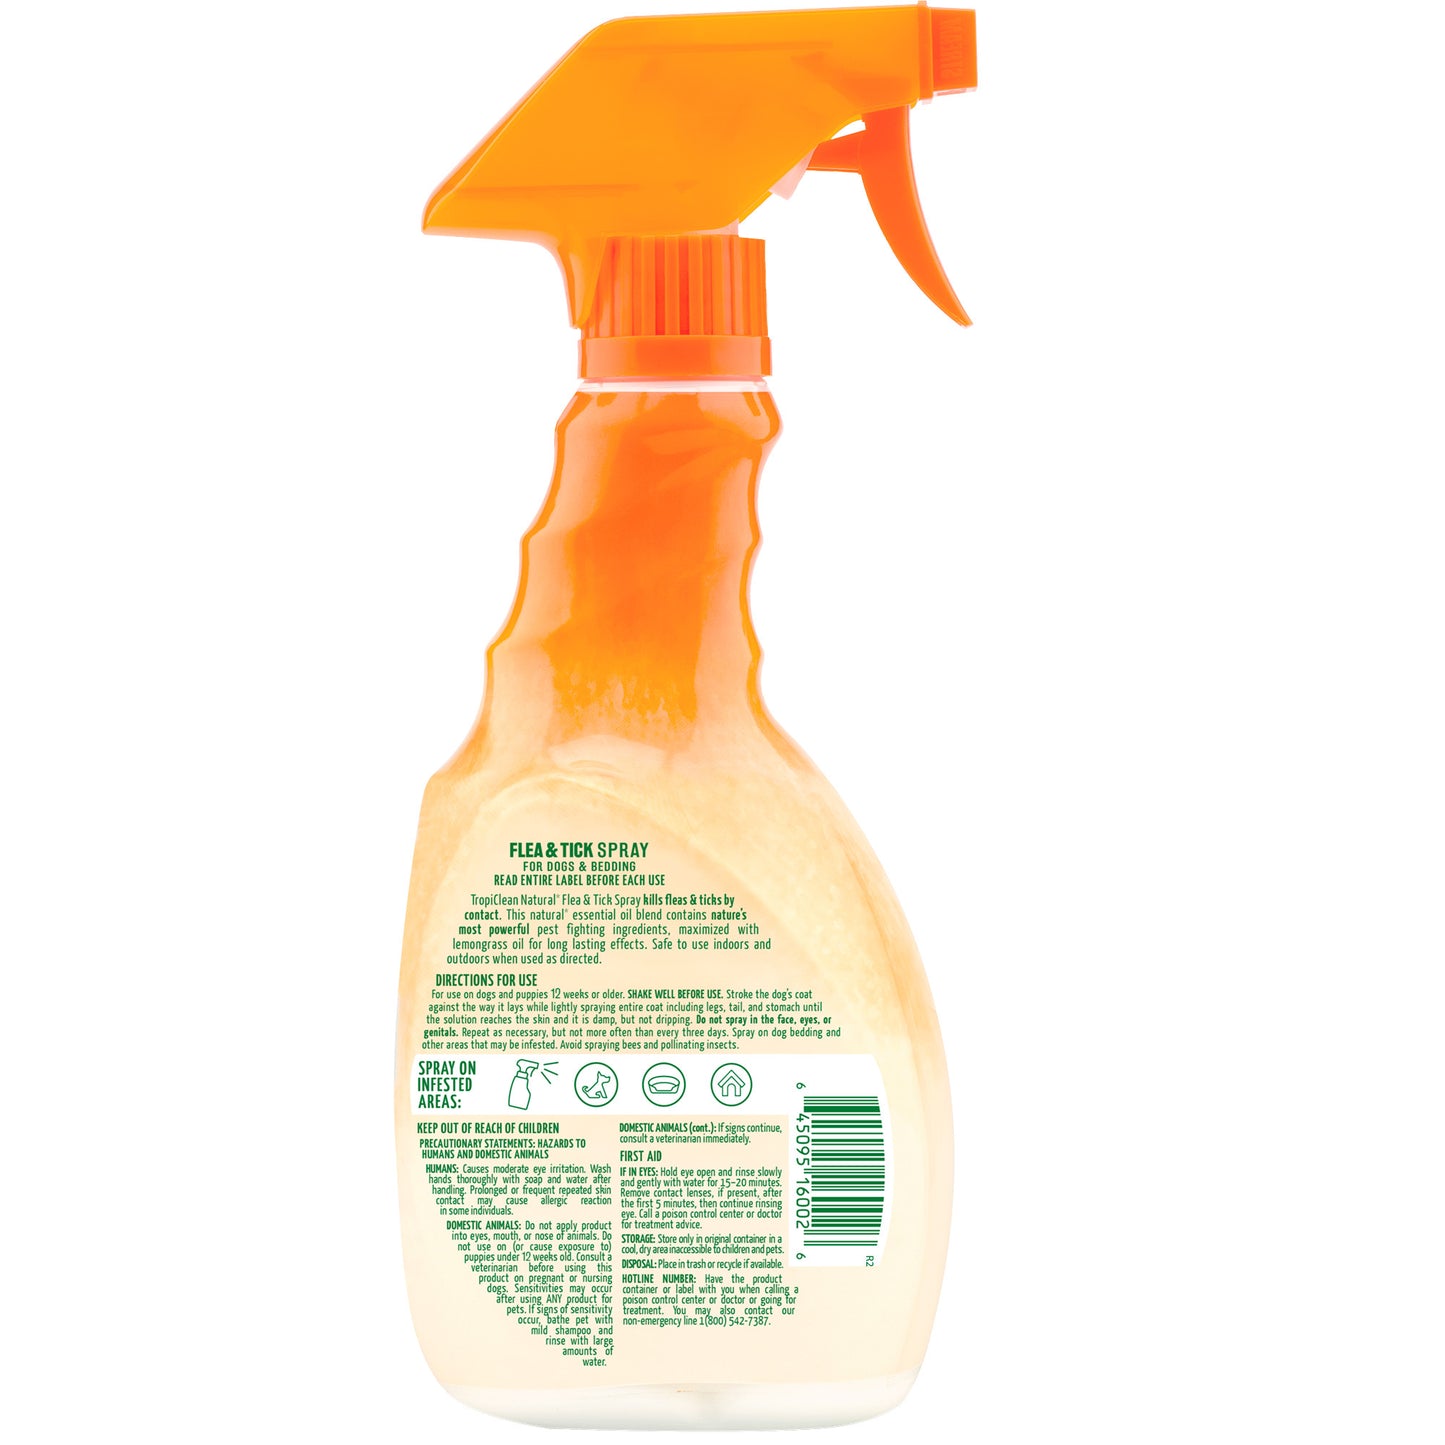 TROPICLEAN NATURAL FLEA & TICK DOG AND BEDDING SPRAY